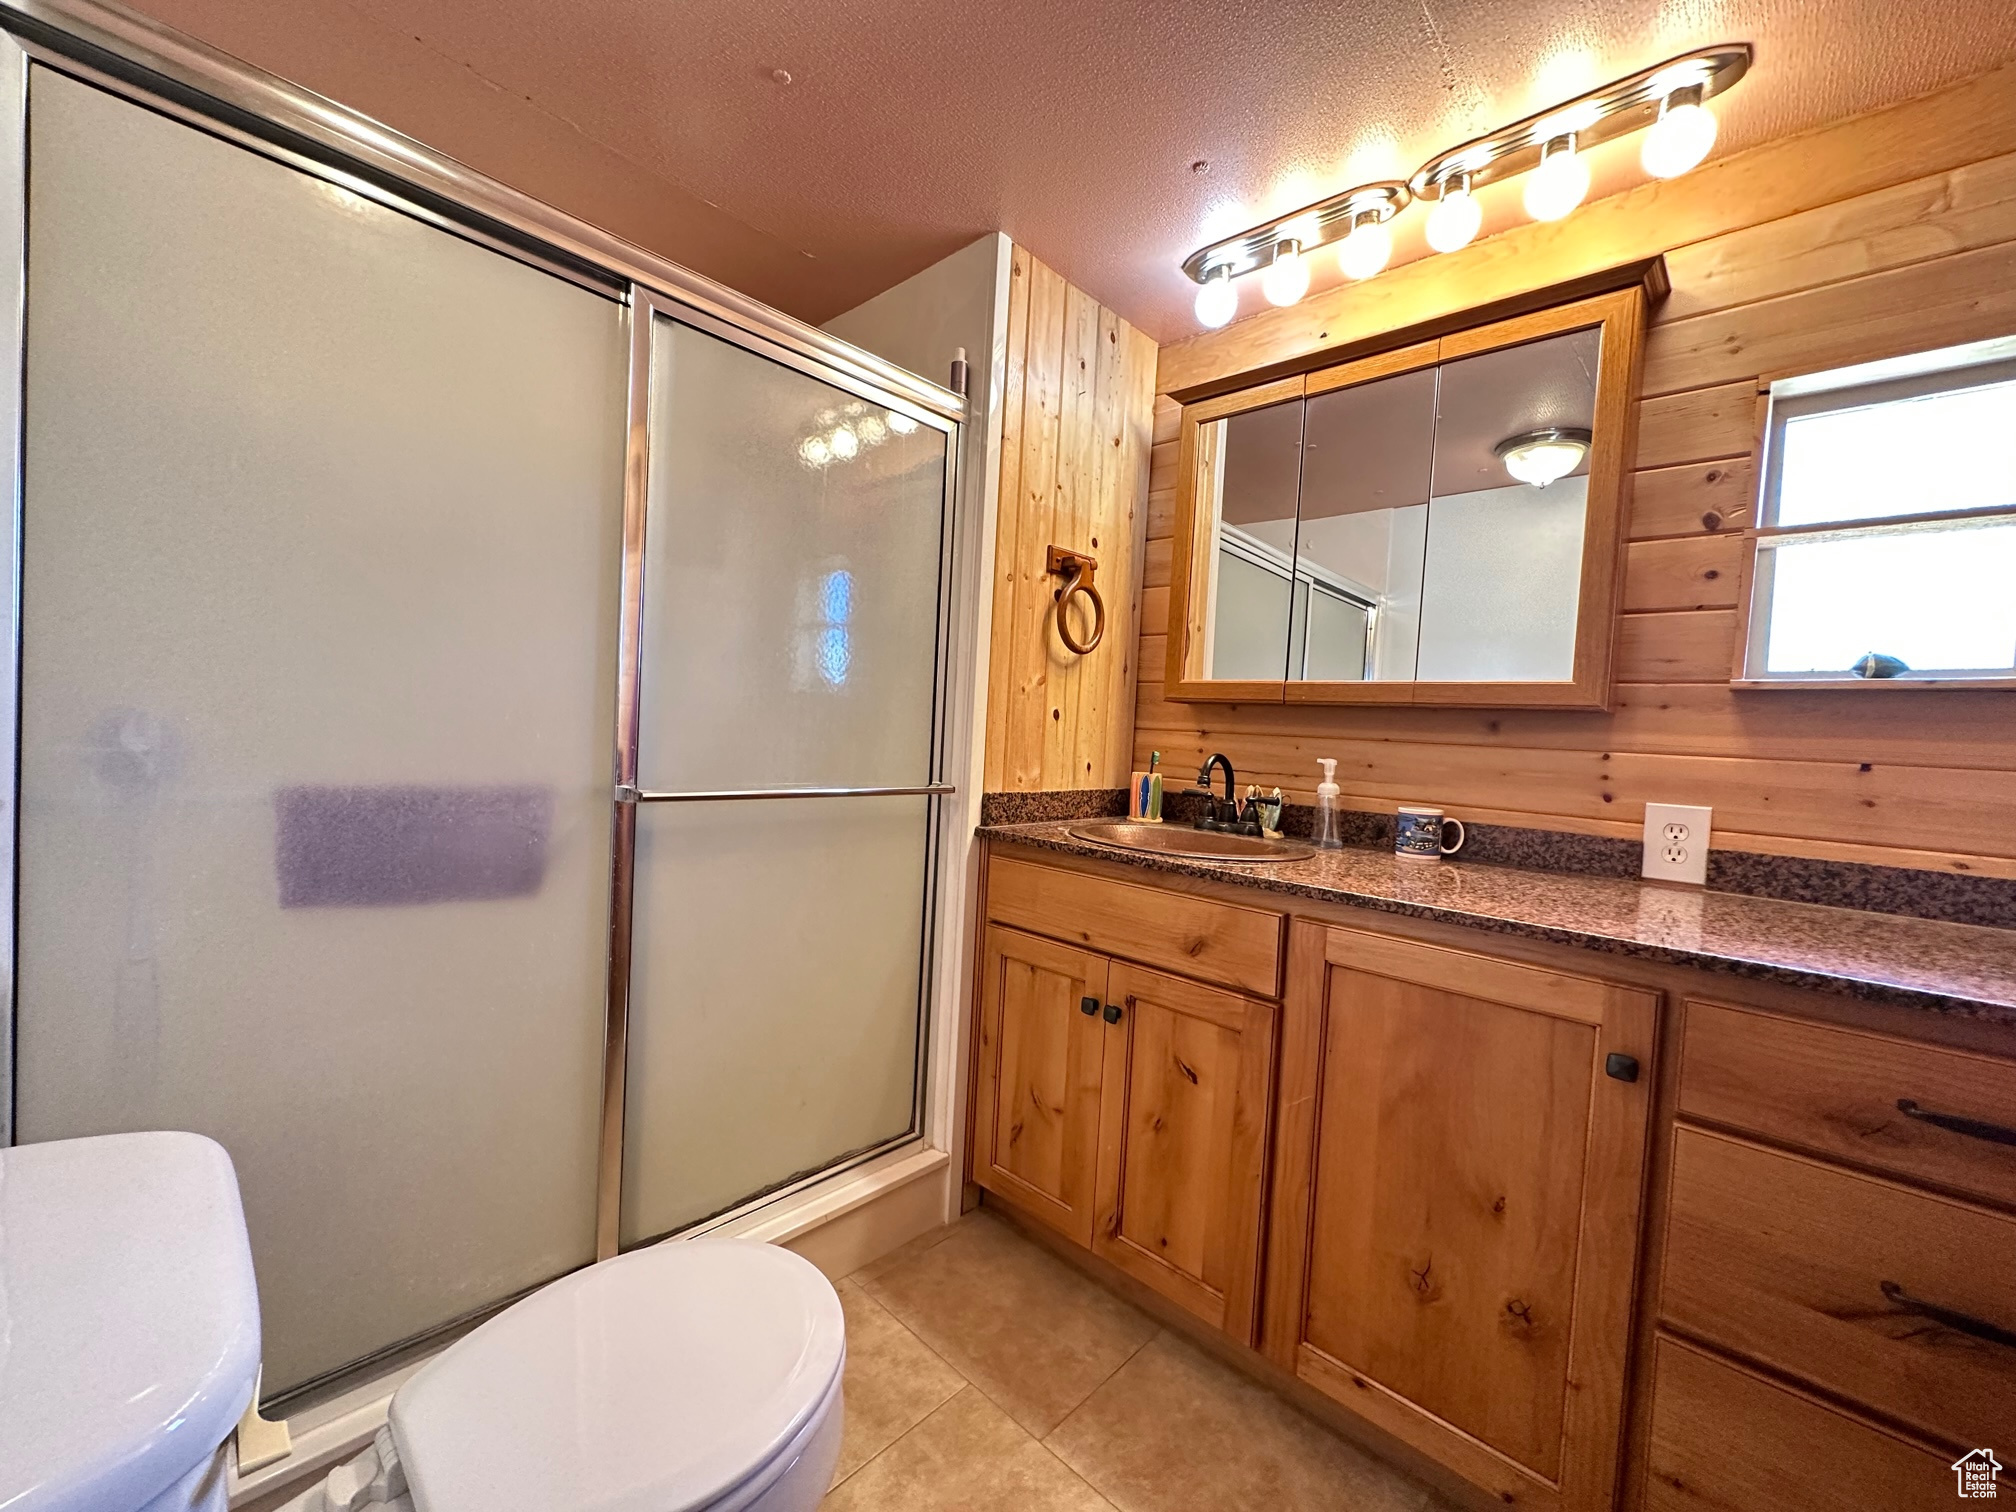 Bathroom with tile floors, wooden walls, vanity, and toilet, tub with shower surround